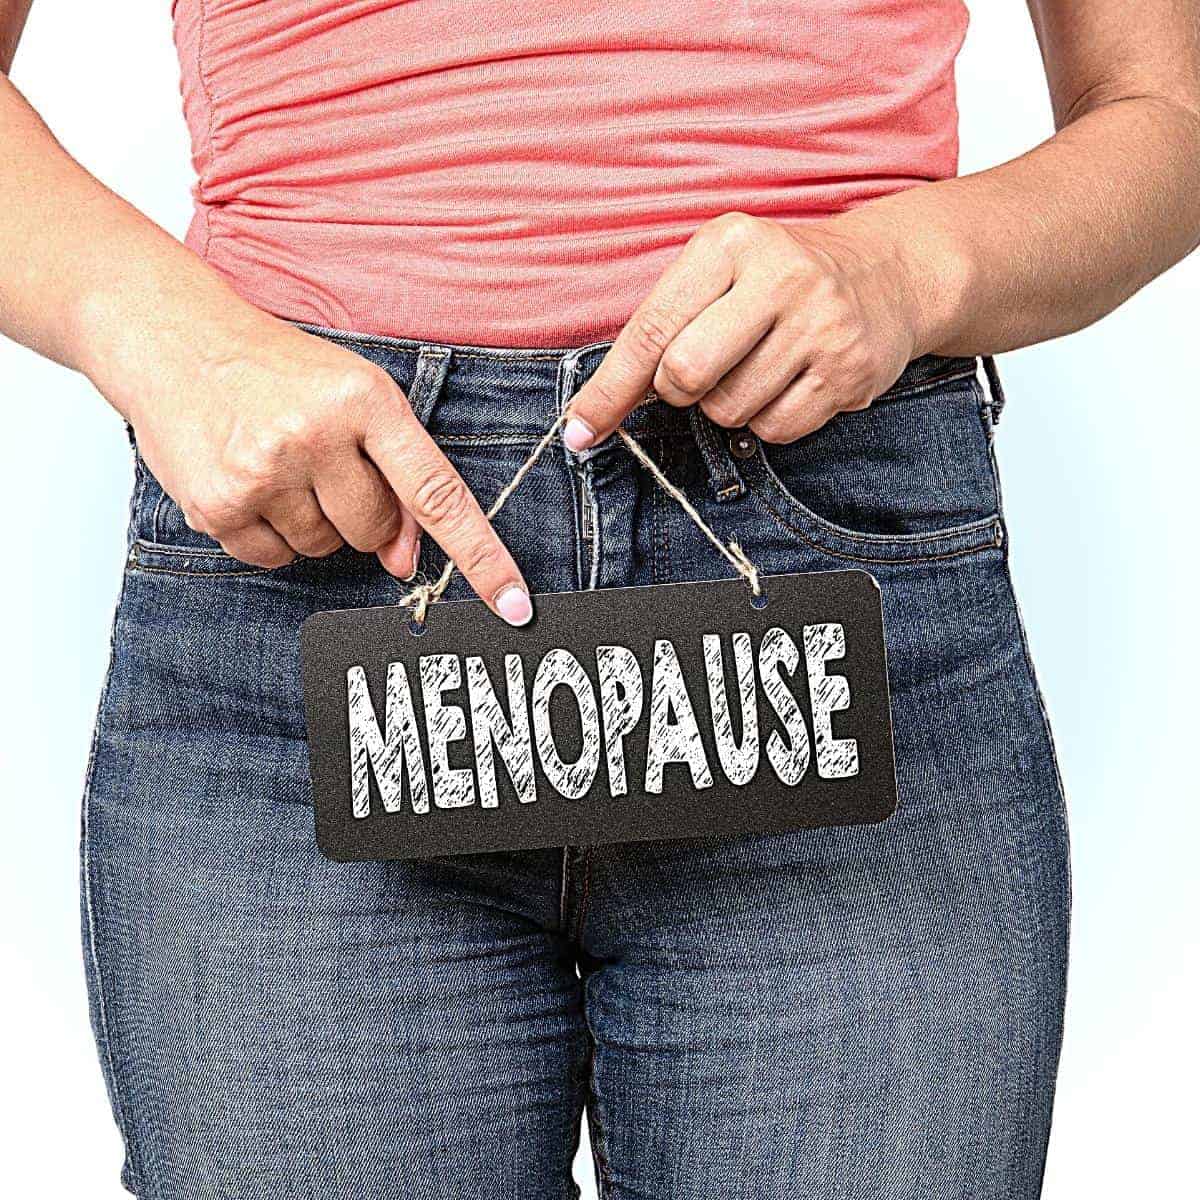 How to eat healthily for menopause